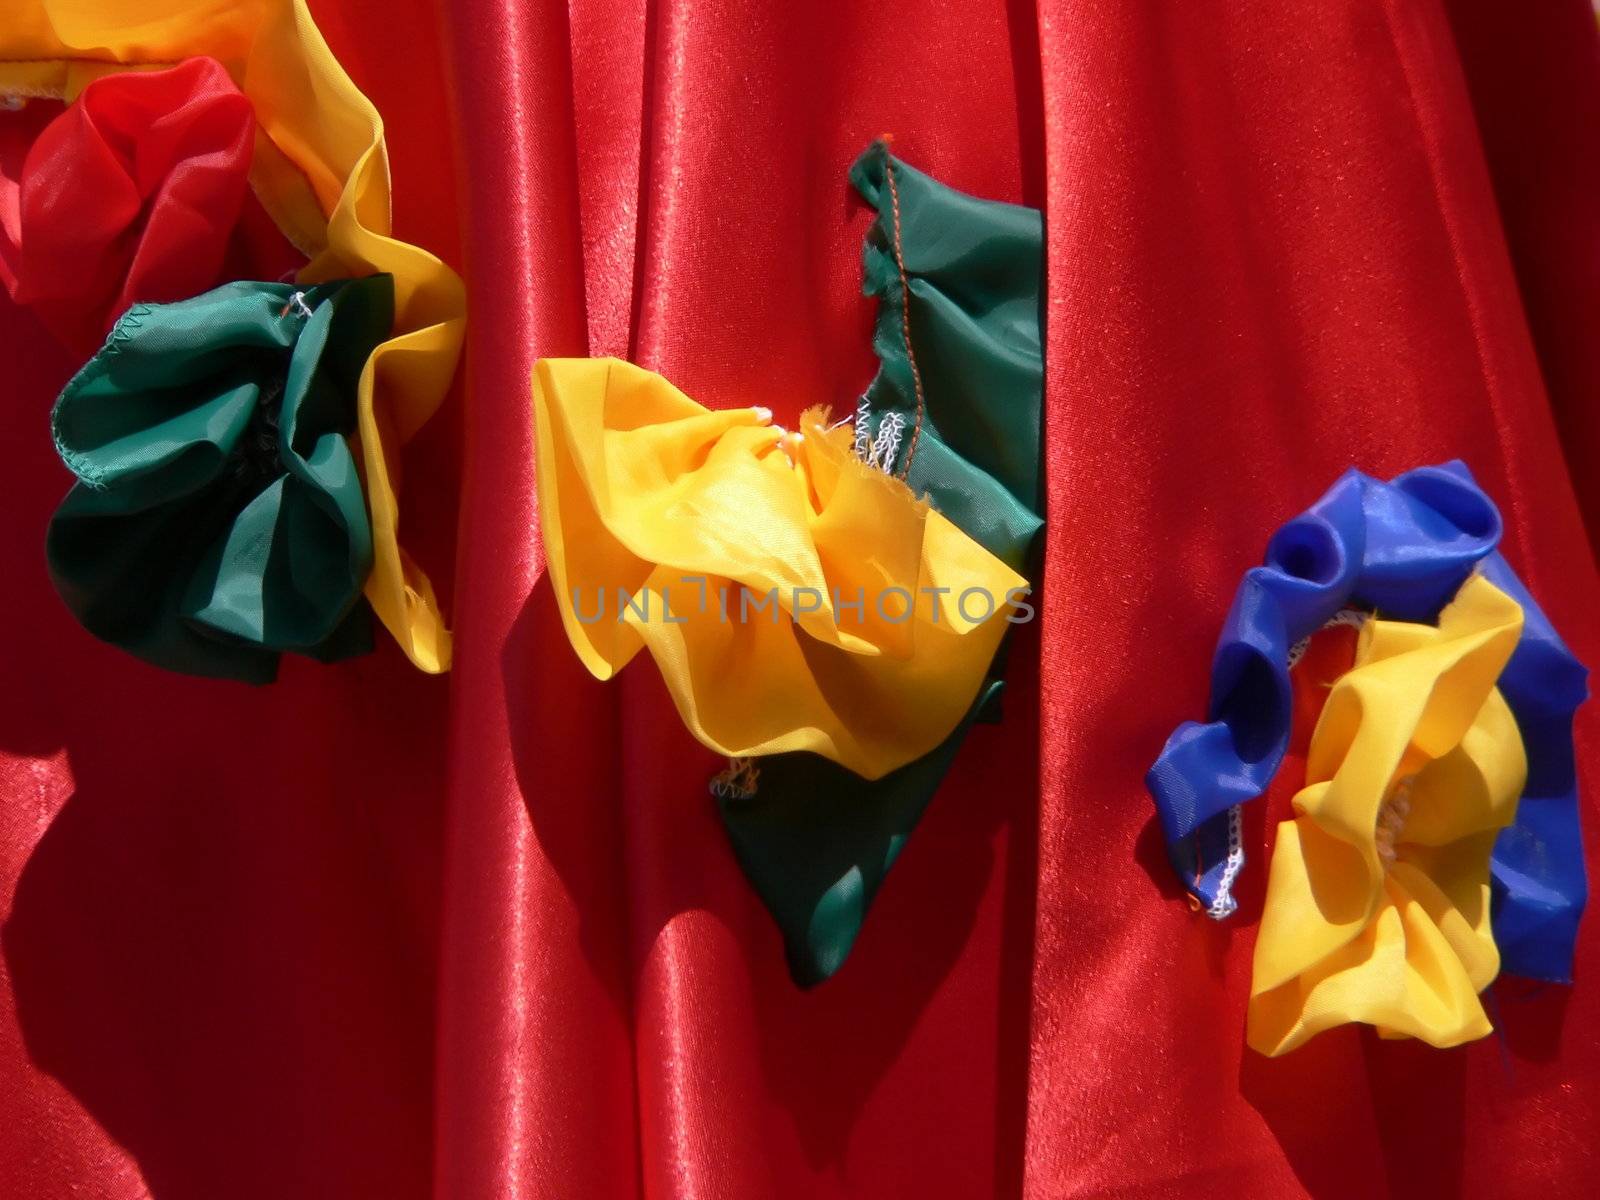 Part of red dress with yellow flowers